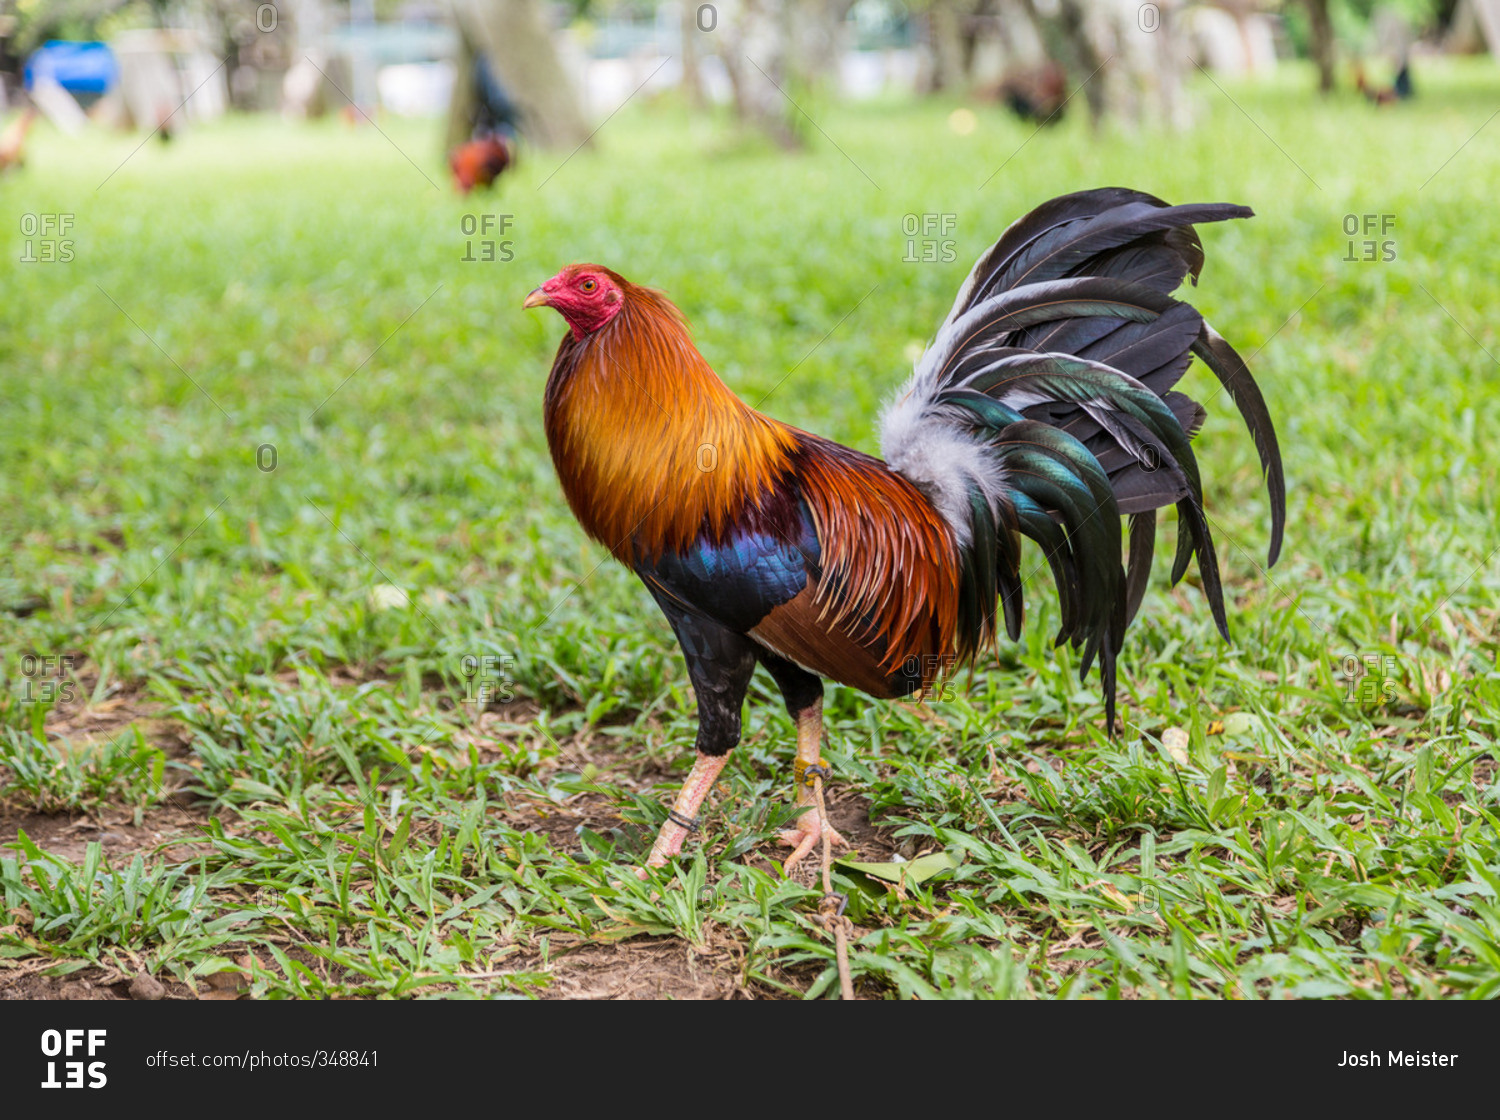 Rooster with long black tail feathers in Philippines